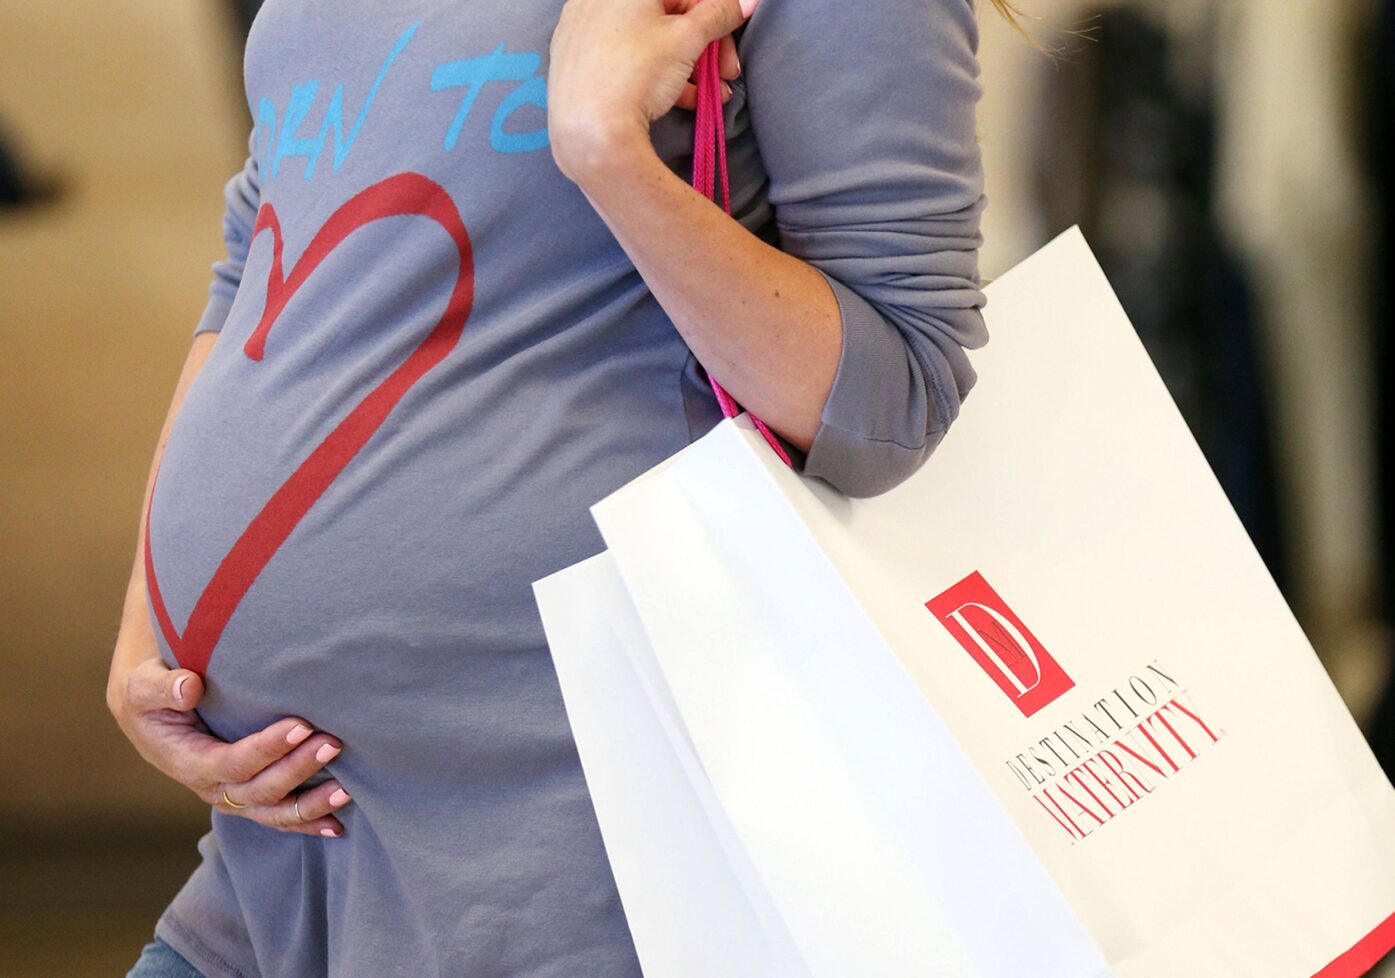 Woman holding pregnant stomach holding a bag with the text Destination Maternity